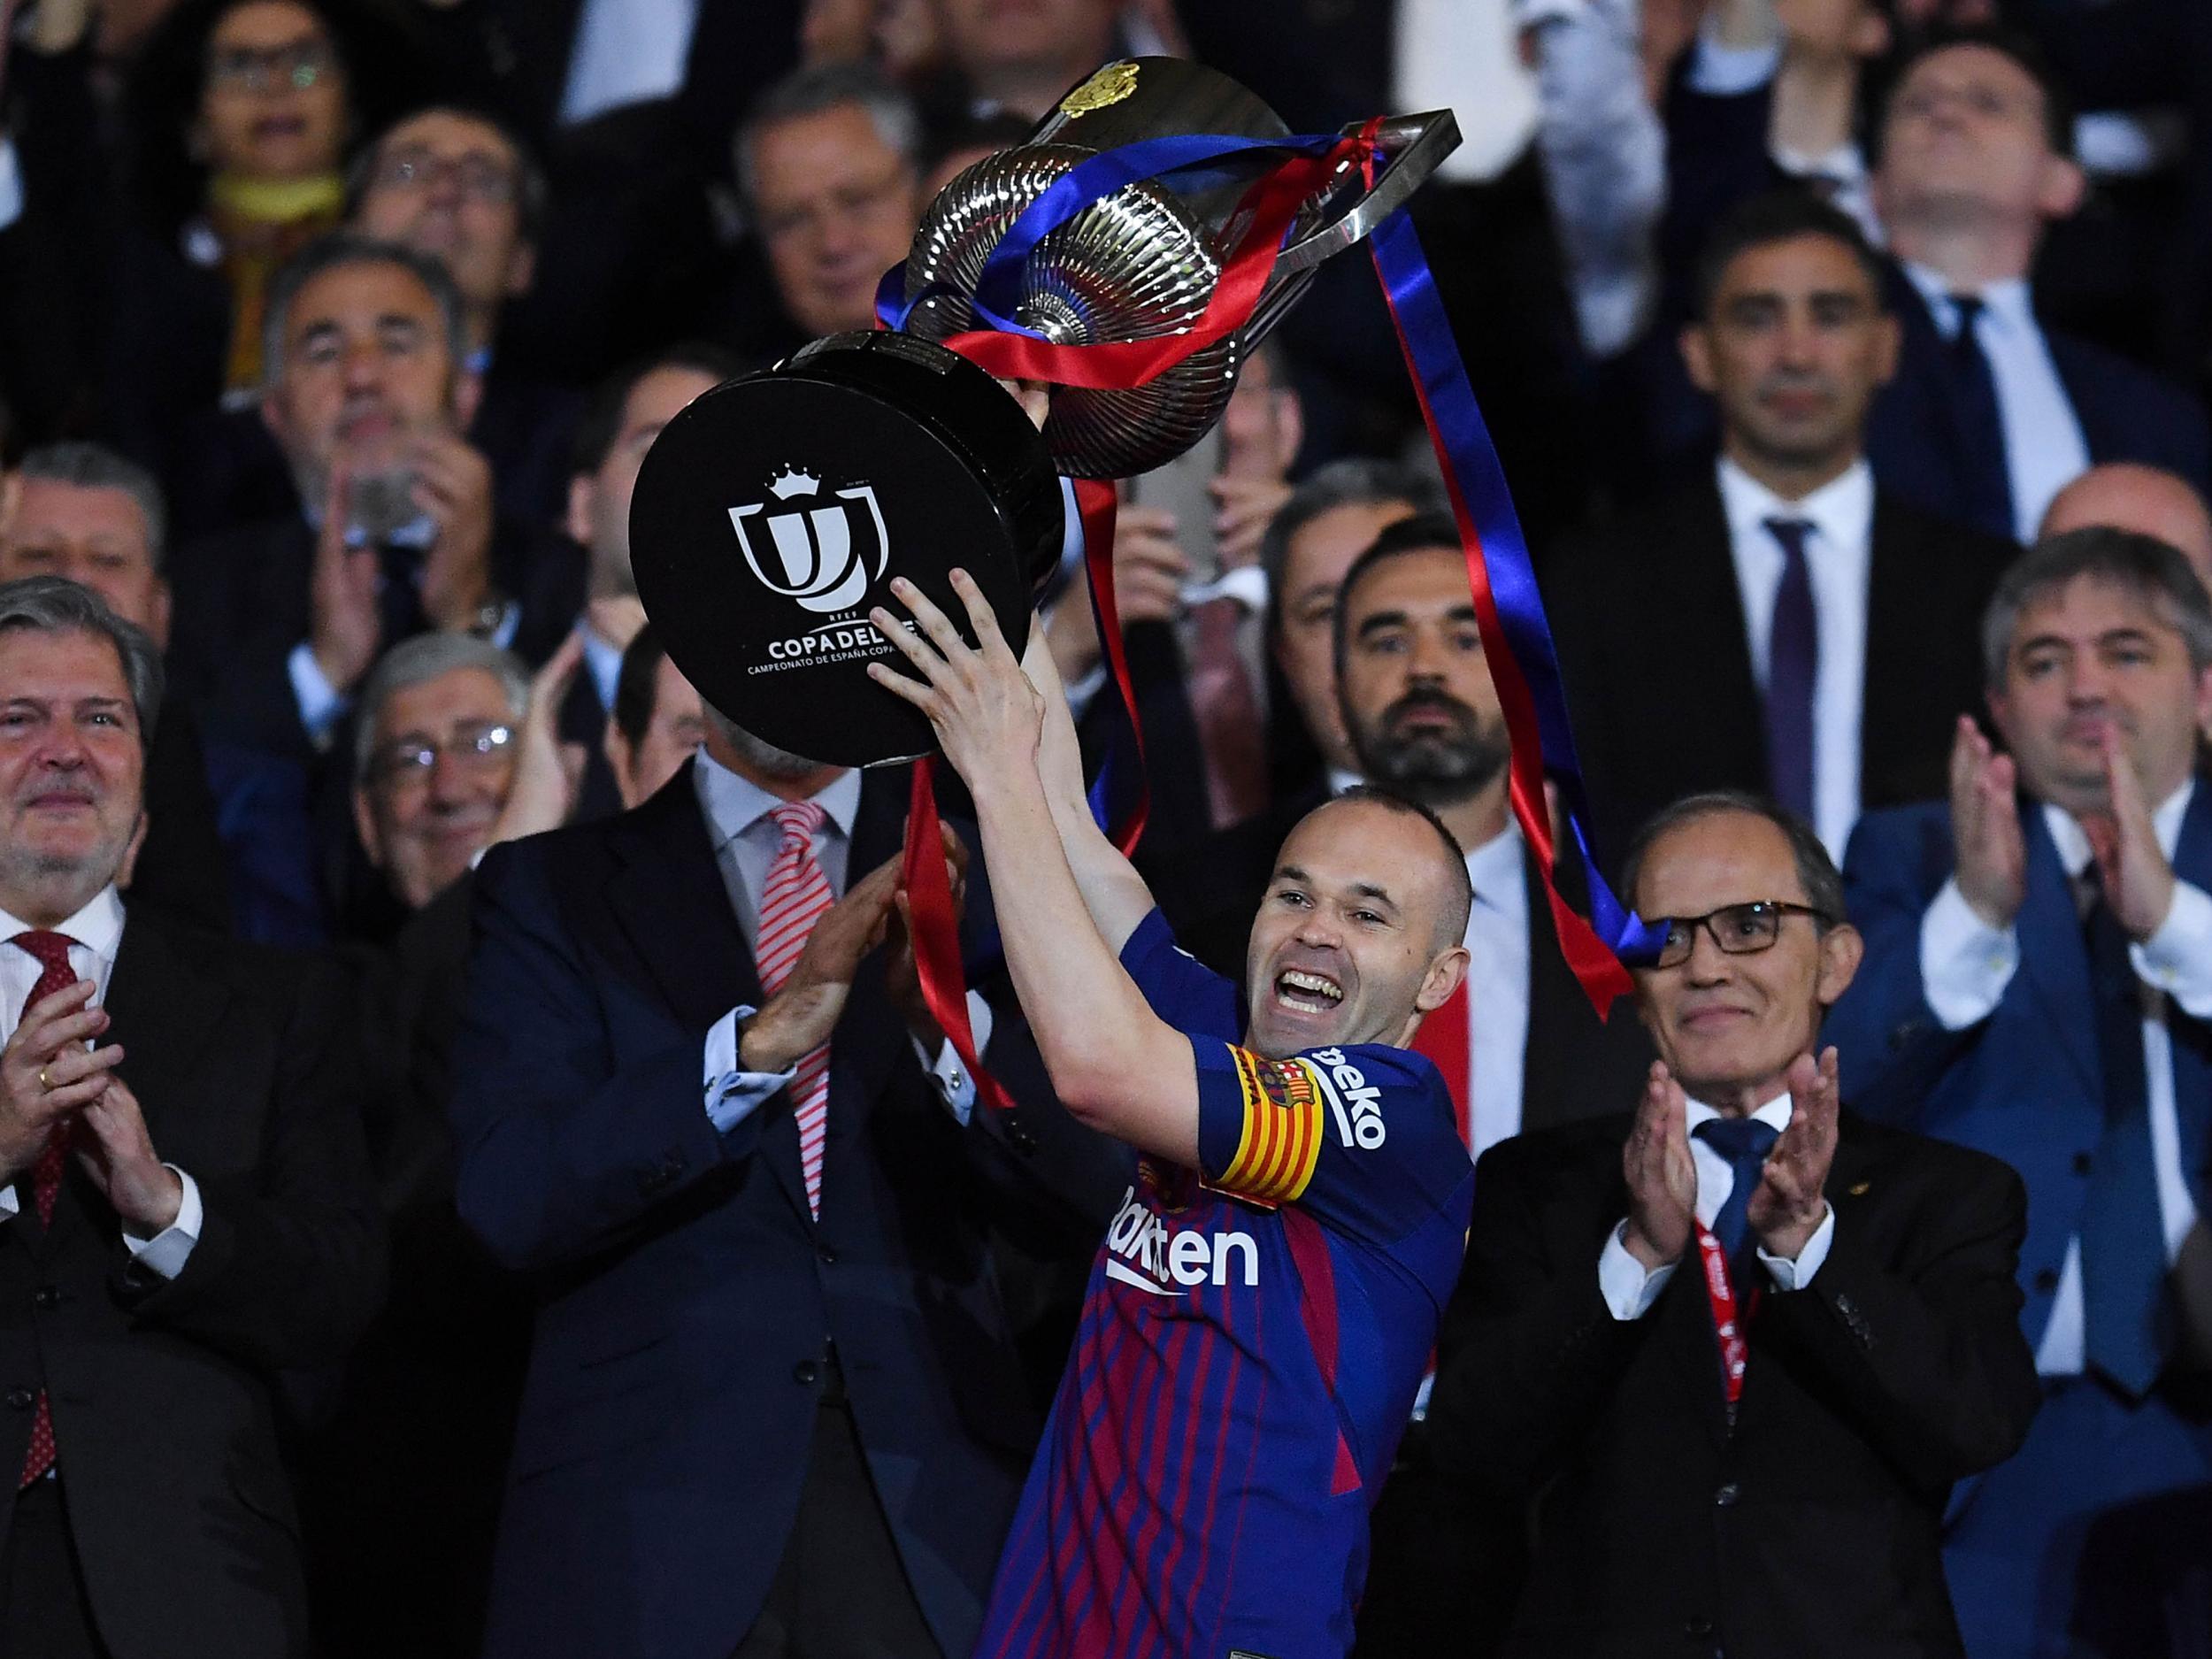 Iniesta lifted the trophy afterwards